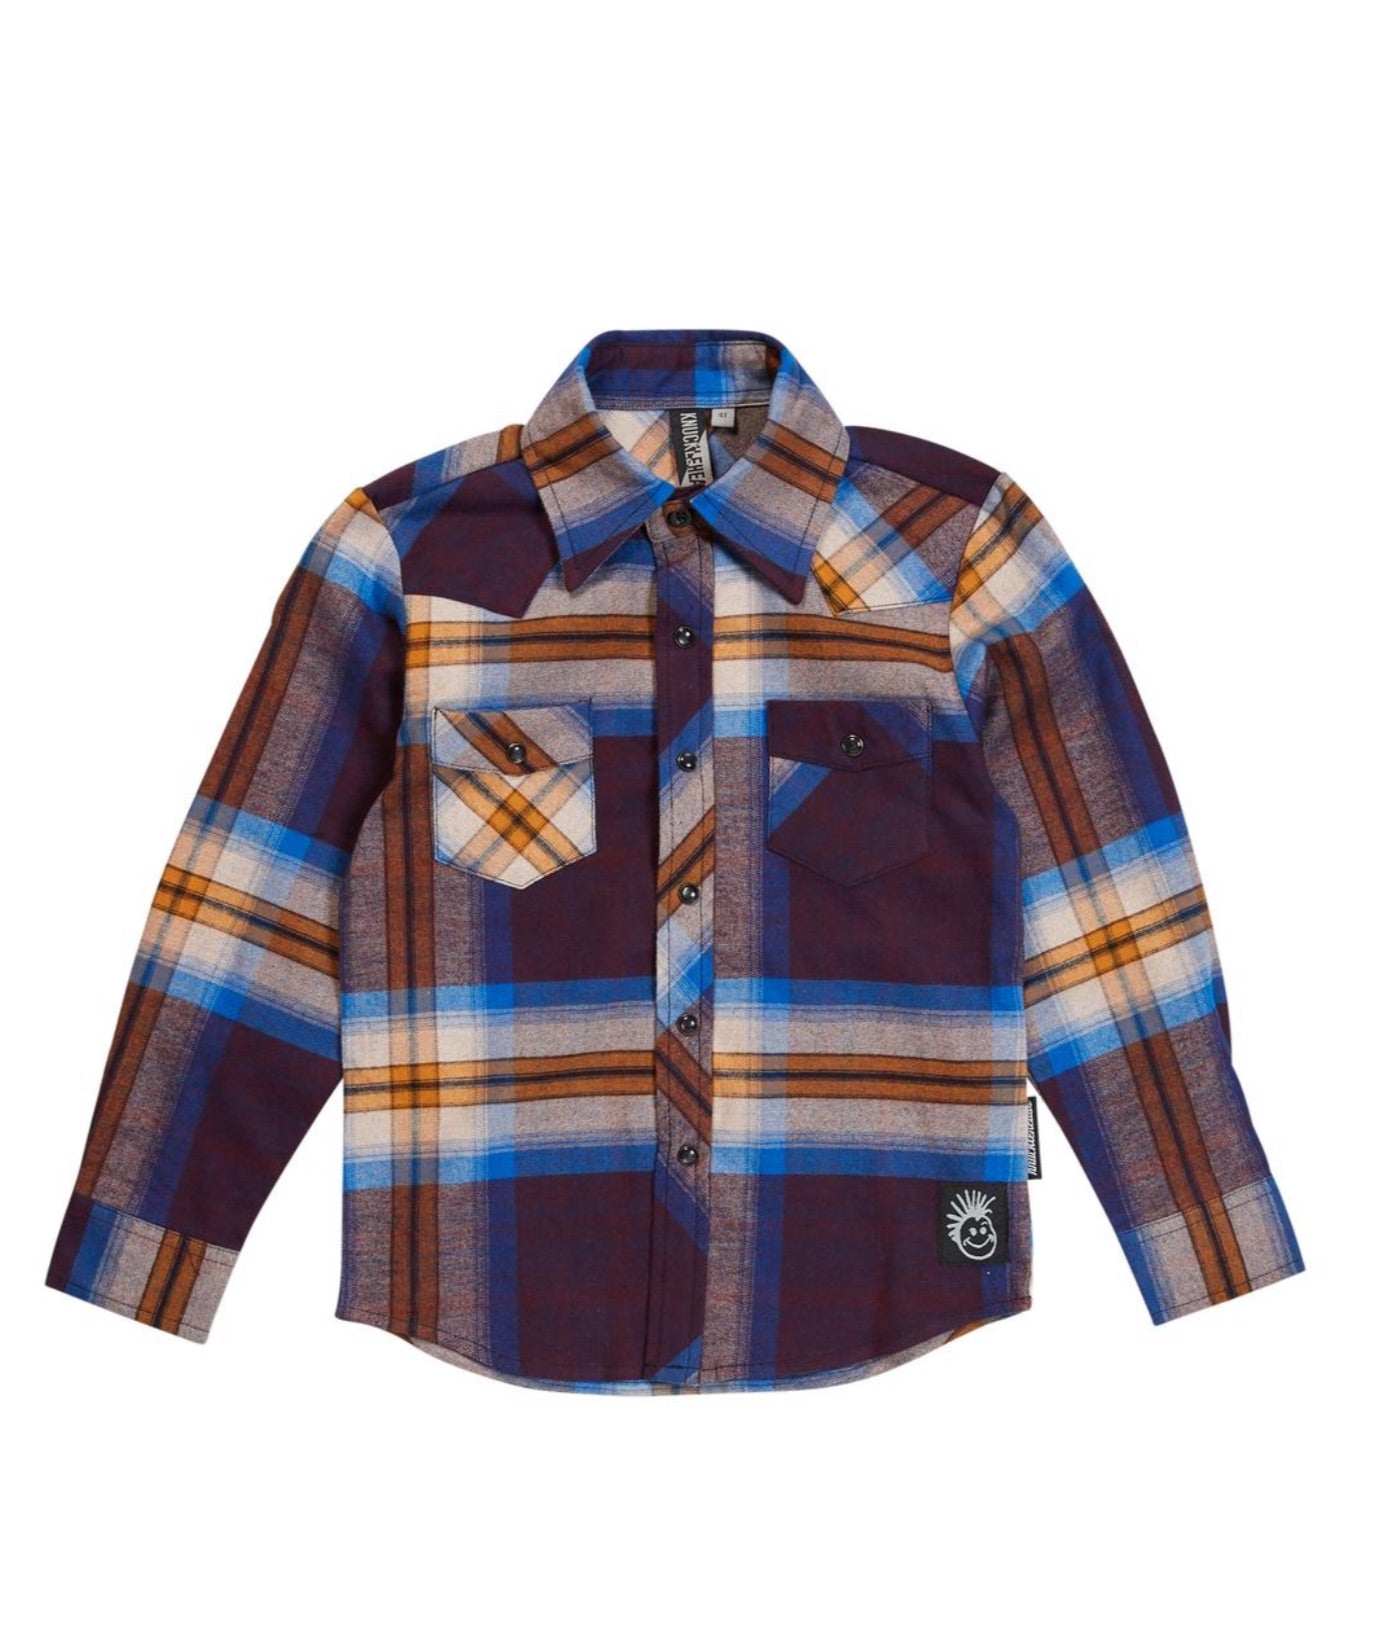 Knuckleheads burgundy and blue flannel